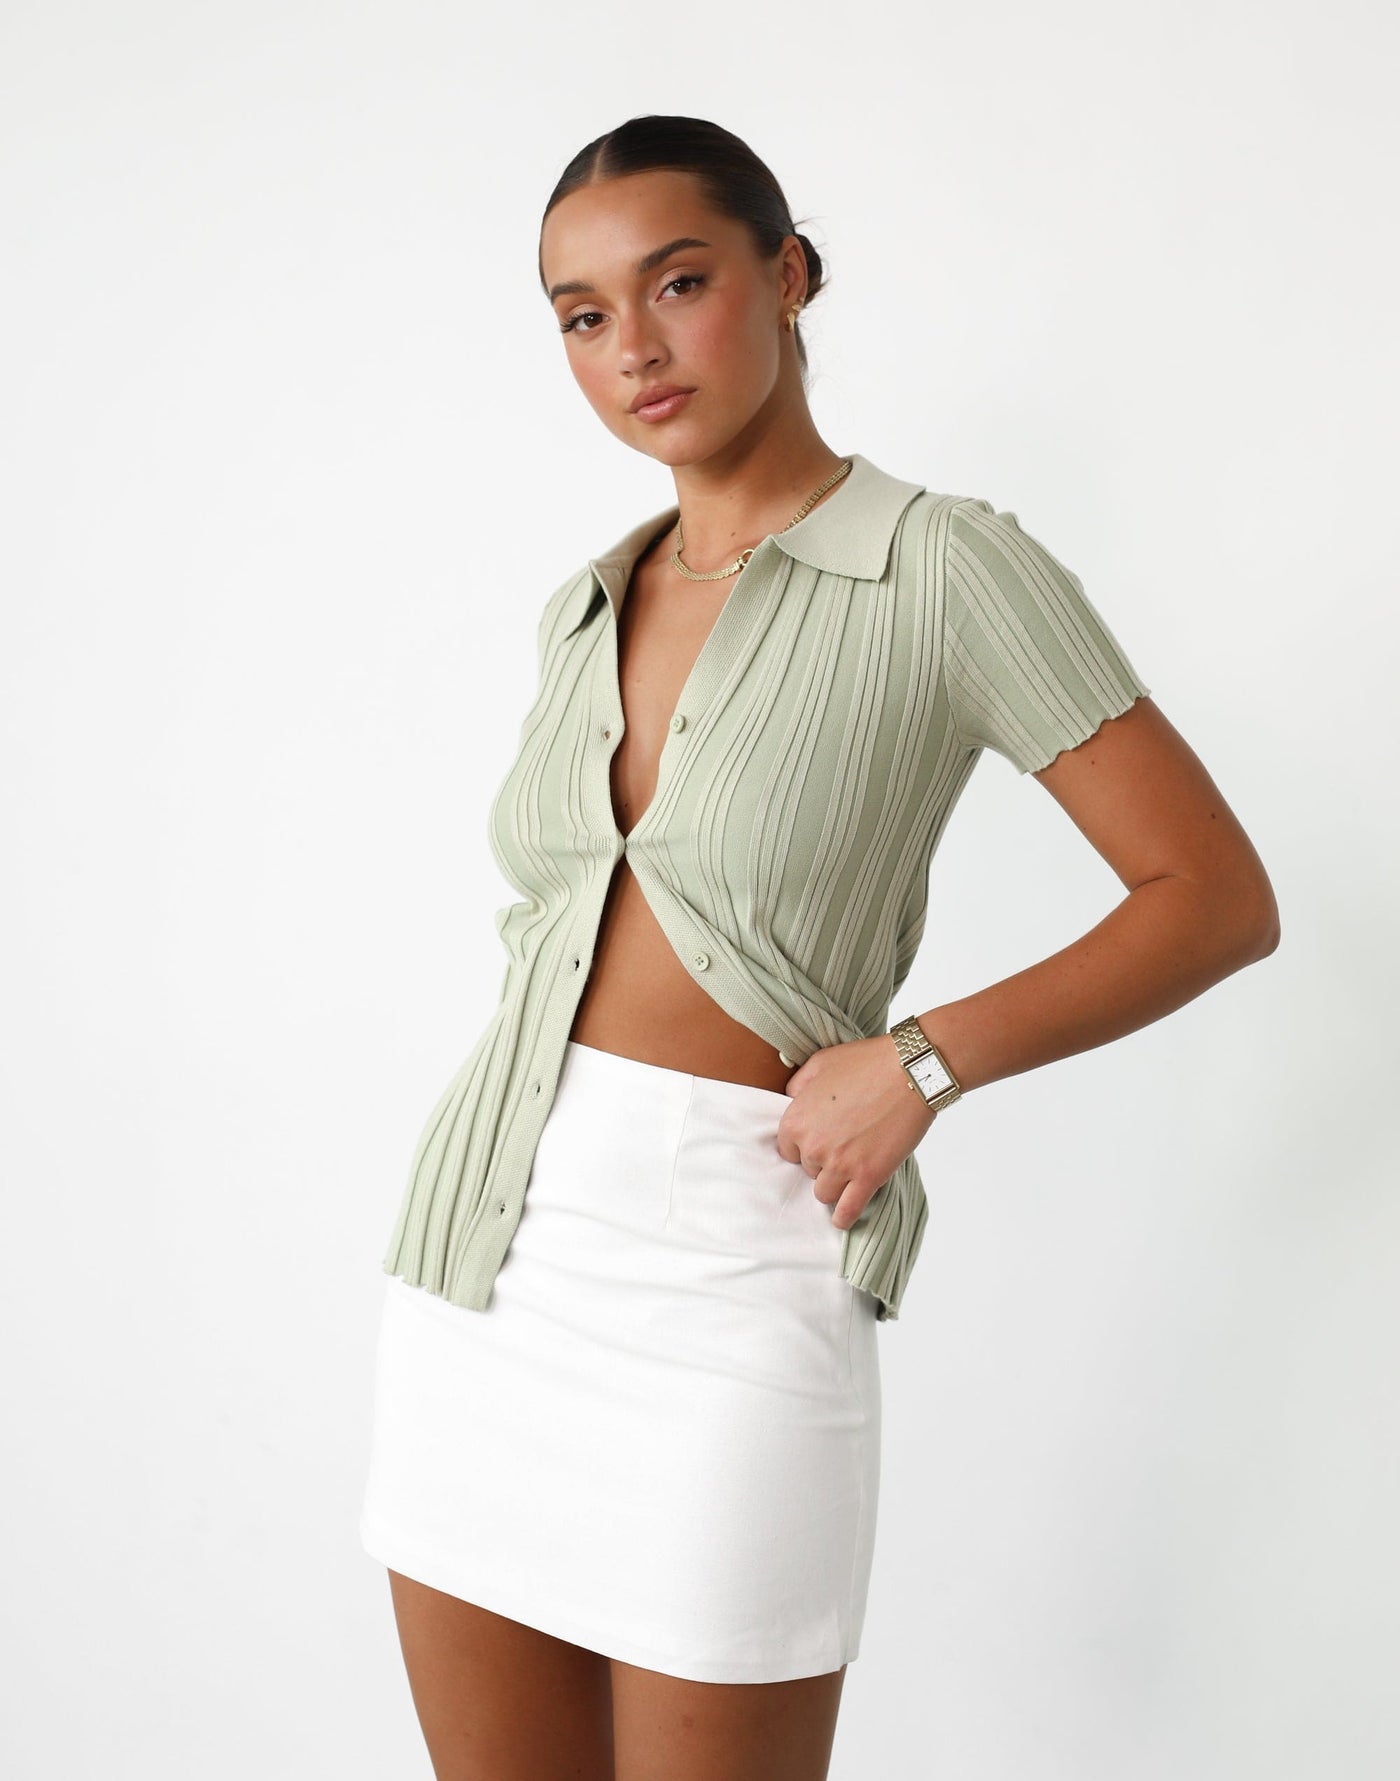 Fran Top (Avocado) - Button Closure Ribbed Top - Women's Top - Charcoal Clothing